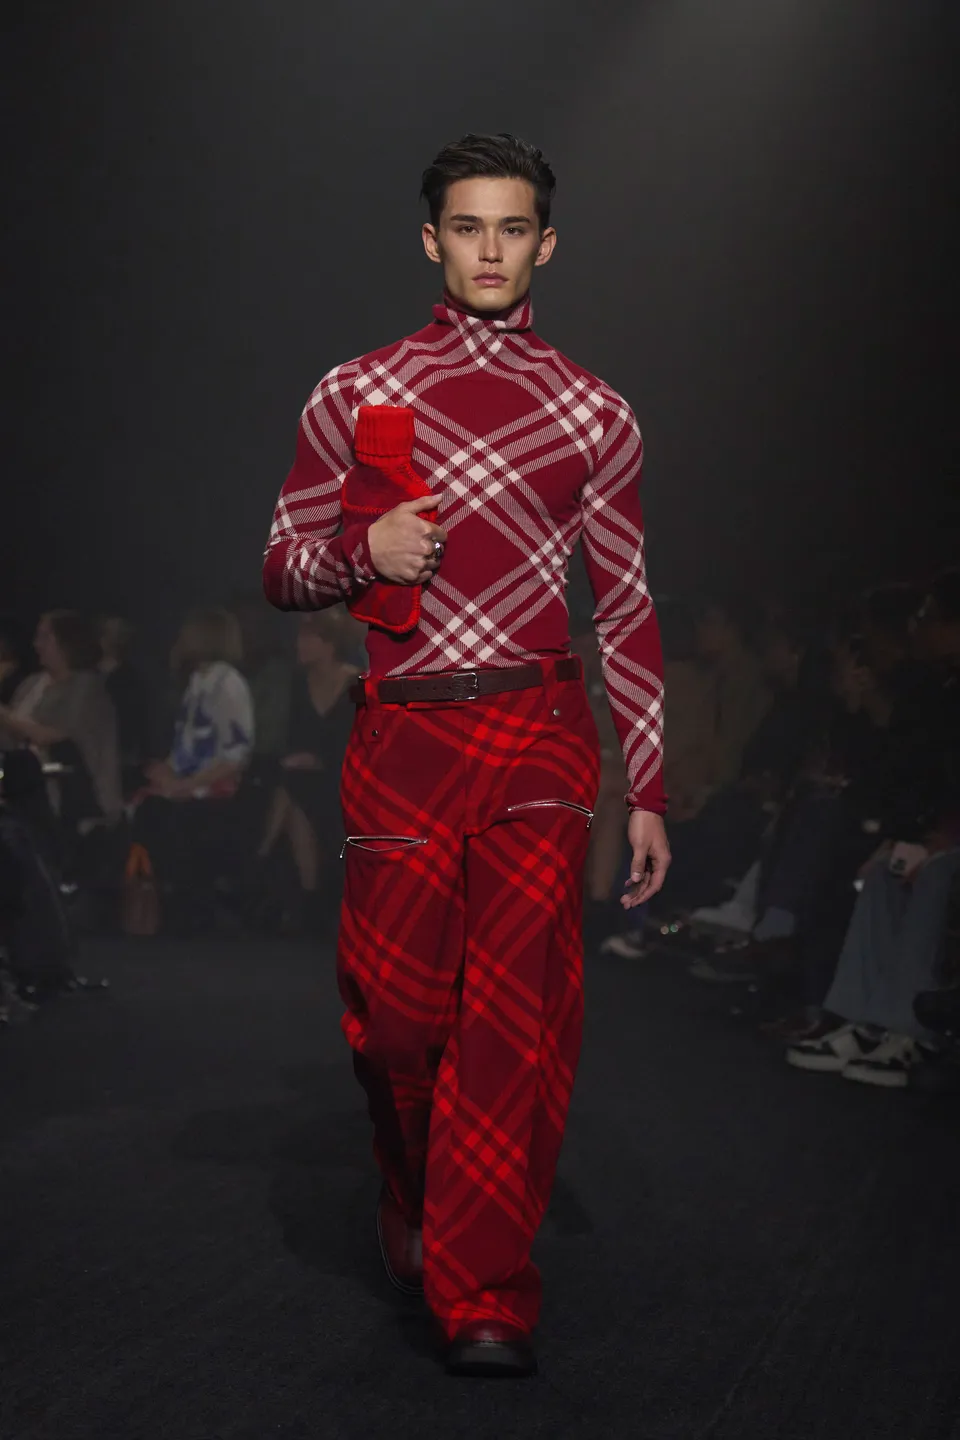 Daniel Lee debuts his first rebranded Burberry collection in London